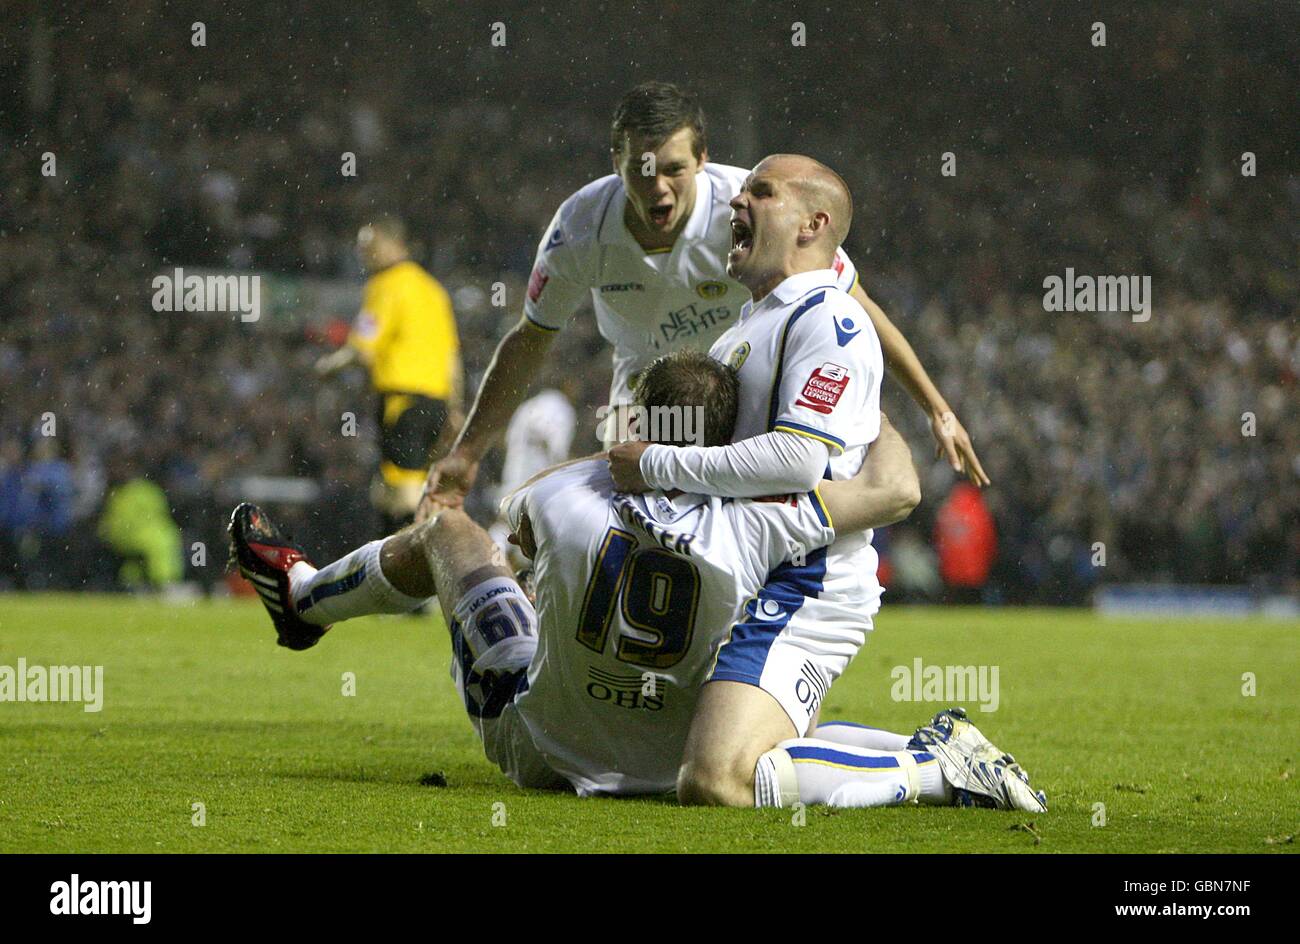 Leeds United's Ben Parker (left), Andy Robinson (right) and Jonathan Howson (centre) celebrtae after team mate Luciano Becchio (out of picture) scores the first goal Stock Photo